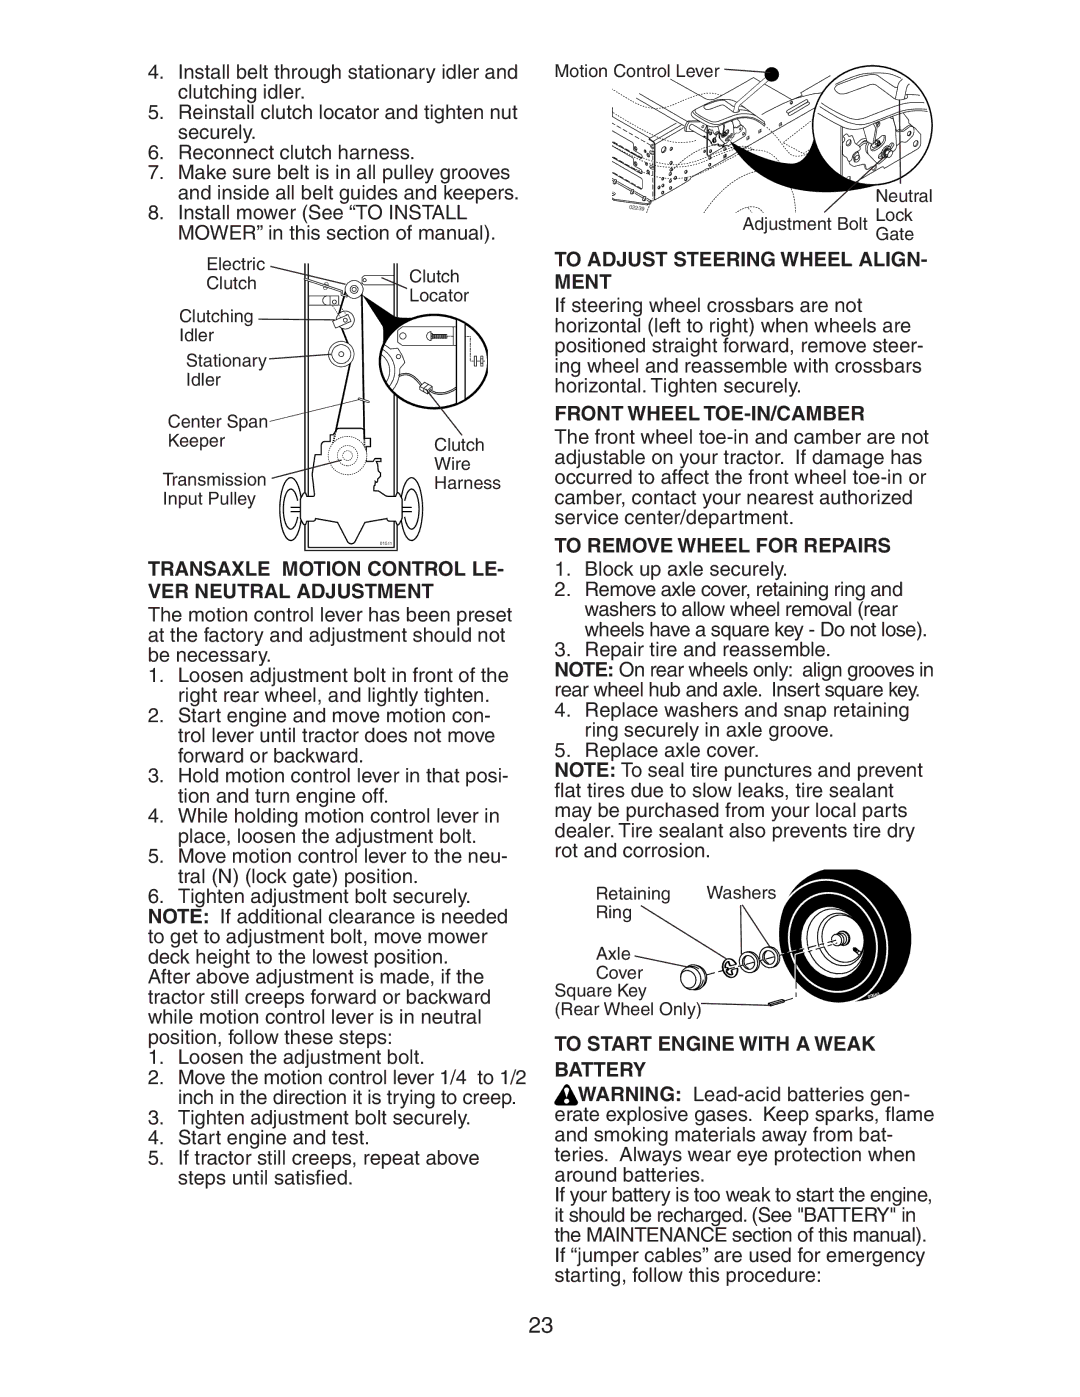 Poulan 191641 manual Transaxle Motion Control LE- VER Neutral Adjustment, To Adjust Steering Wheel ALIGN- Ment 